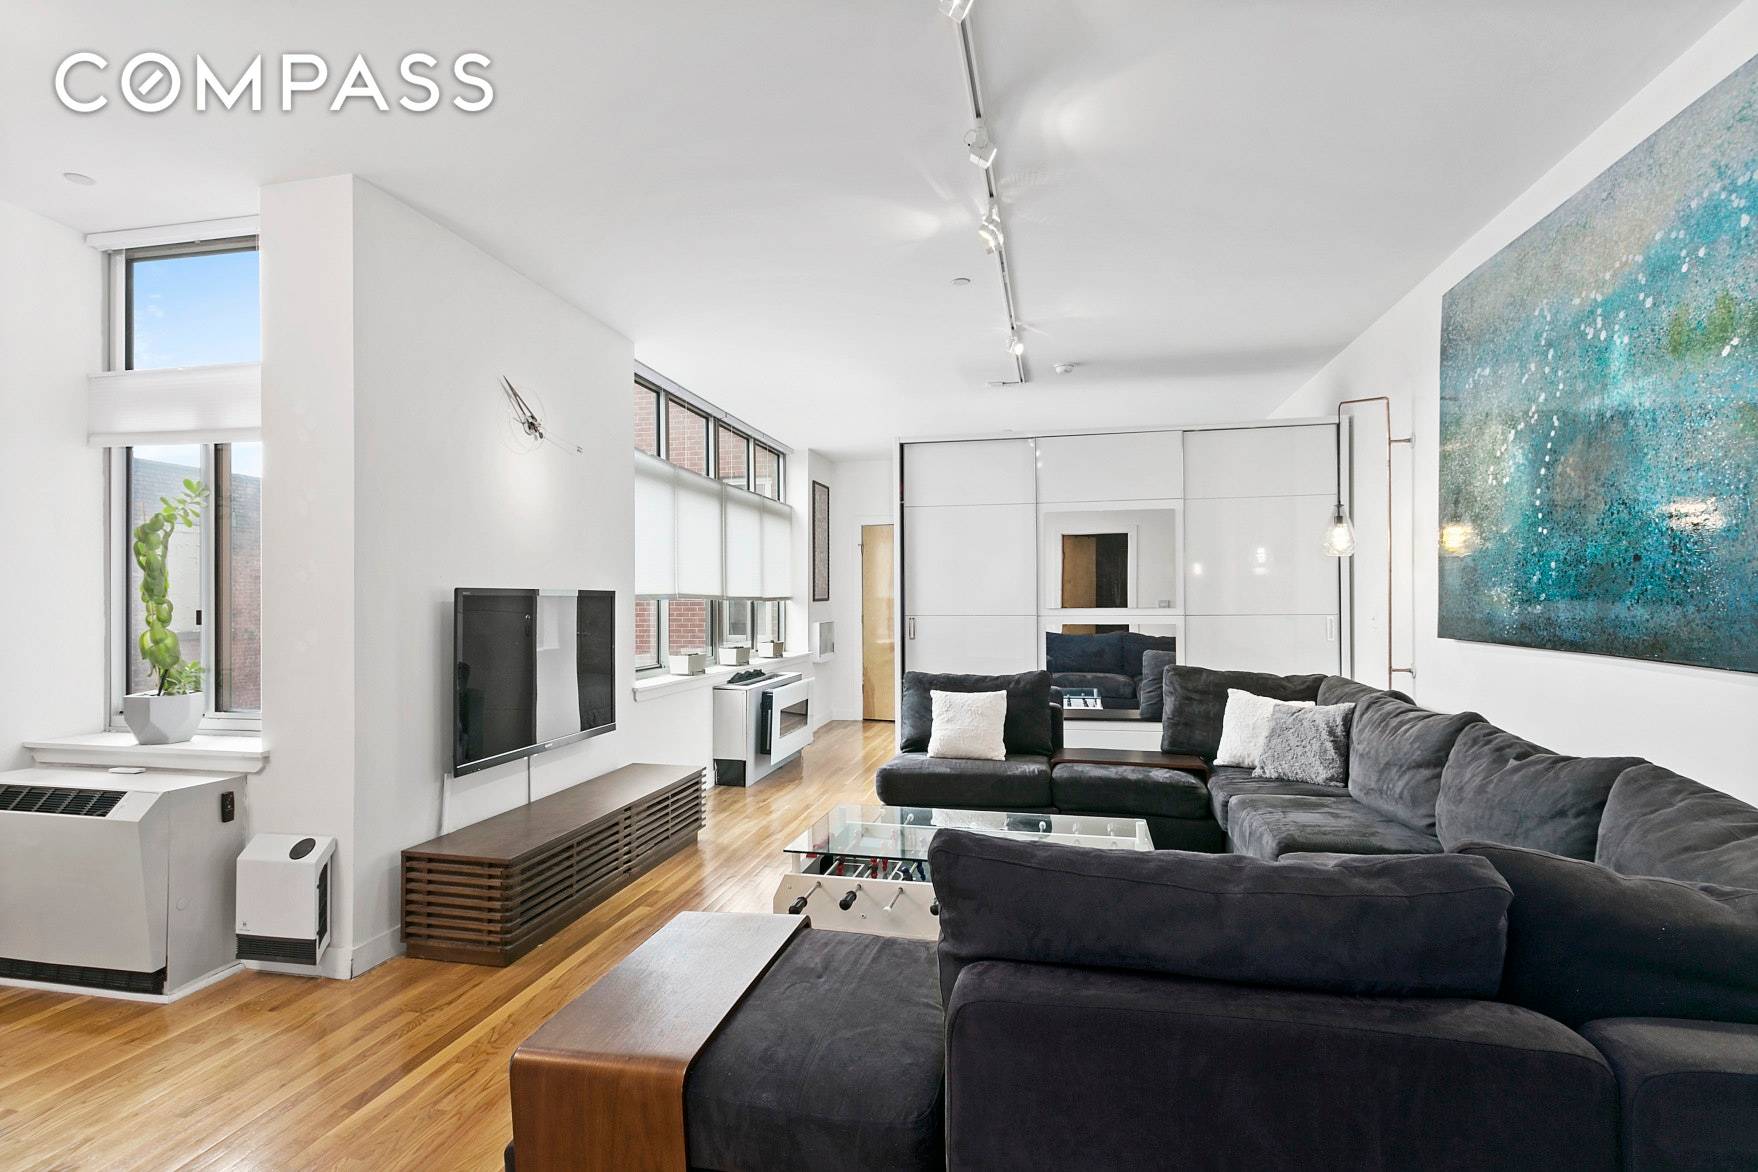 An elegantly designed loft with 821 square feet of open living space and 9 1 2 feet ceilings, this home is located in the heart of Harlem, just a few ...